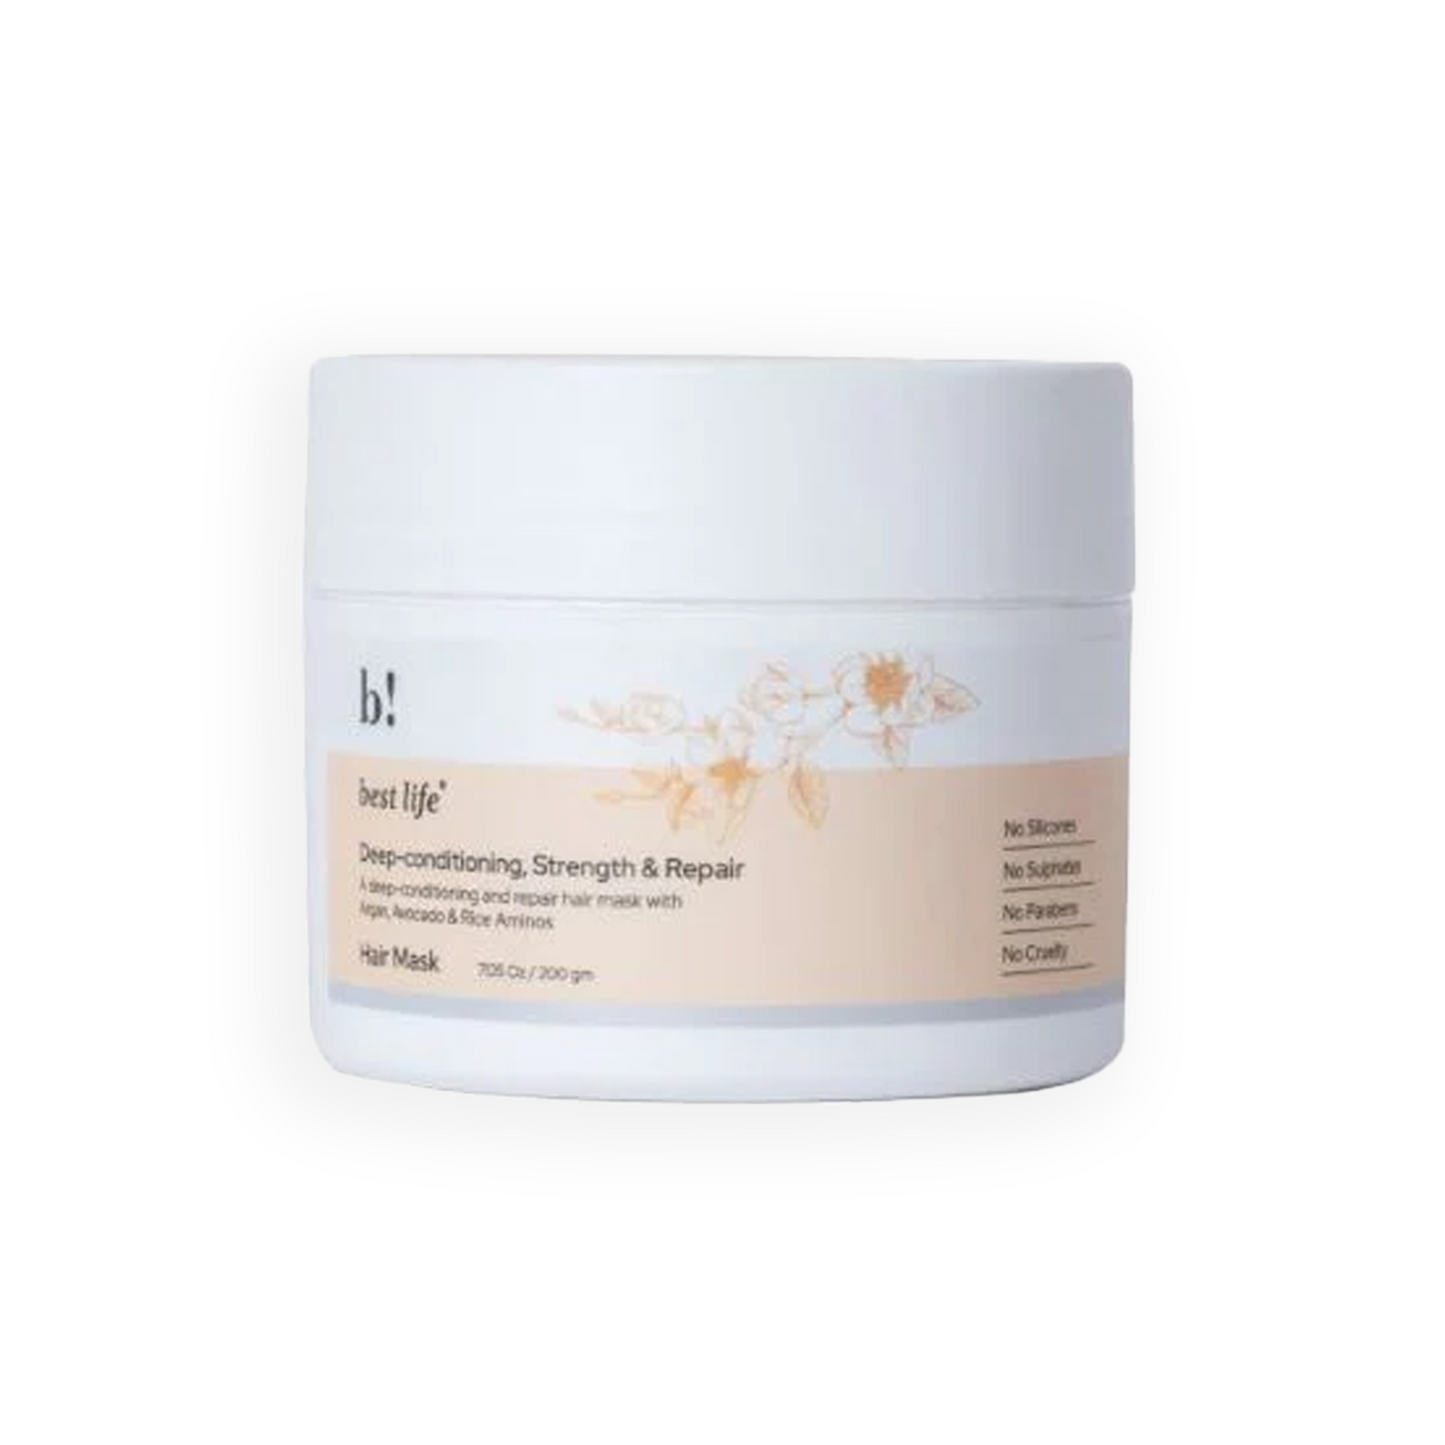 Deep Conditioning Strength & Repair Hair Mask for curly,wavy & straight hair